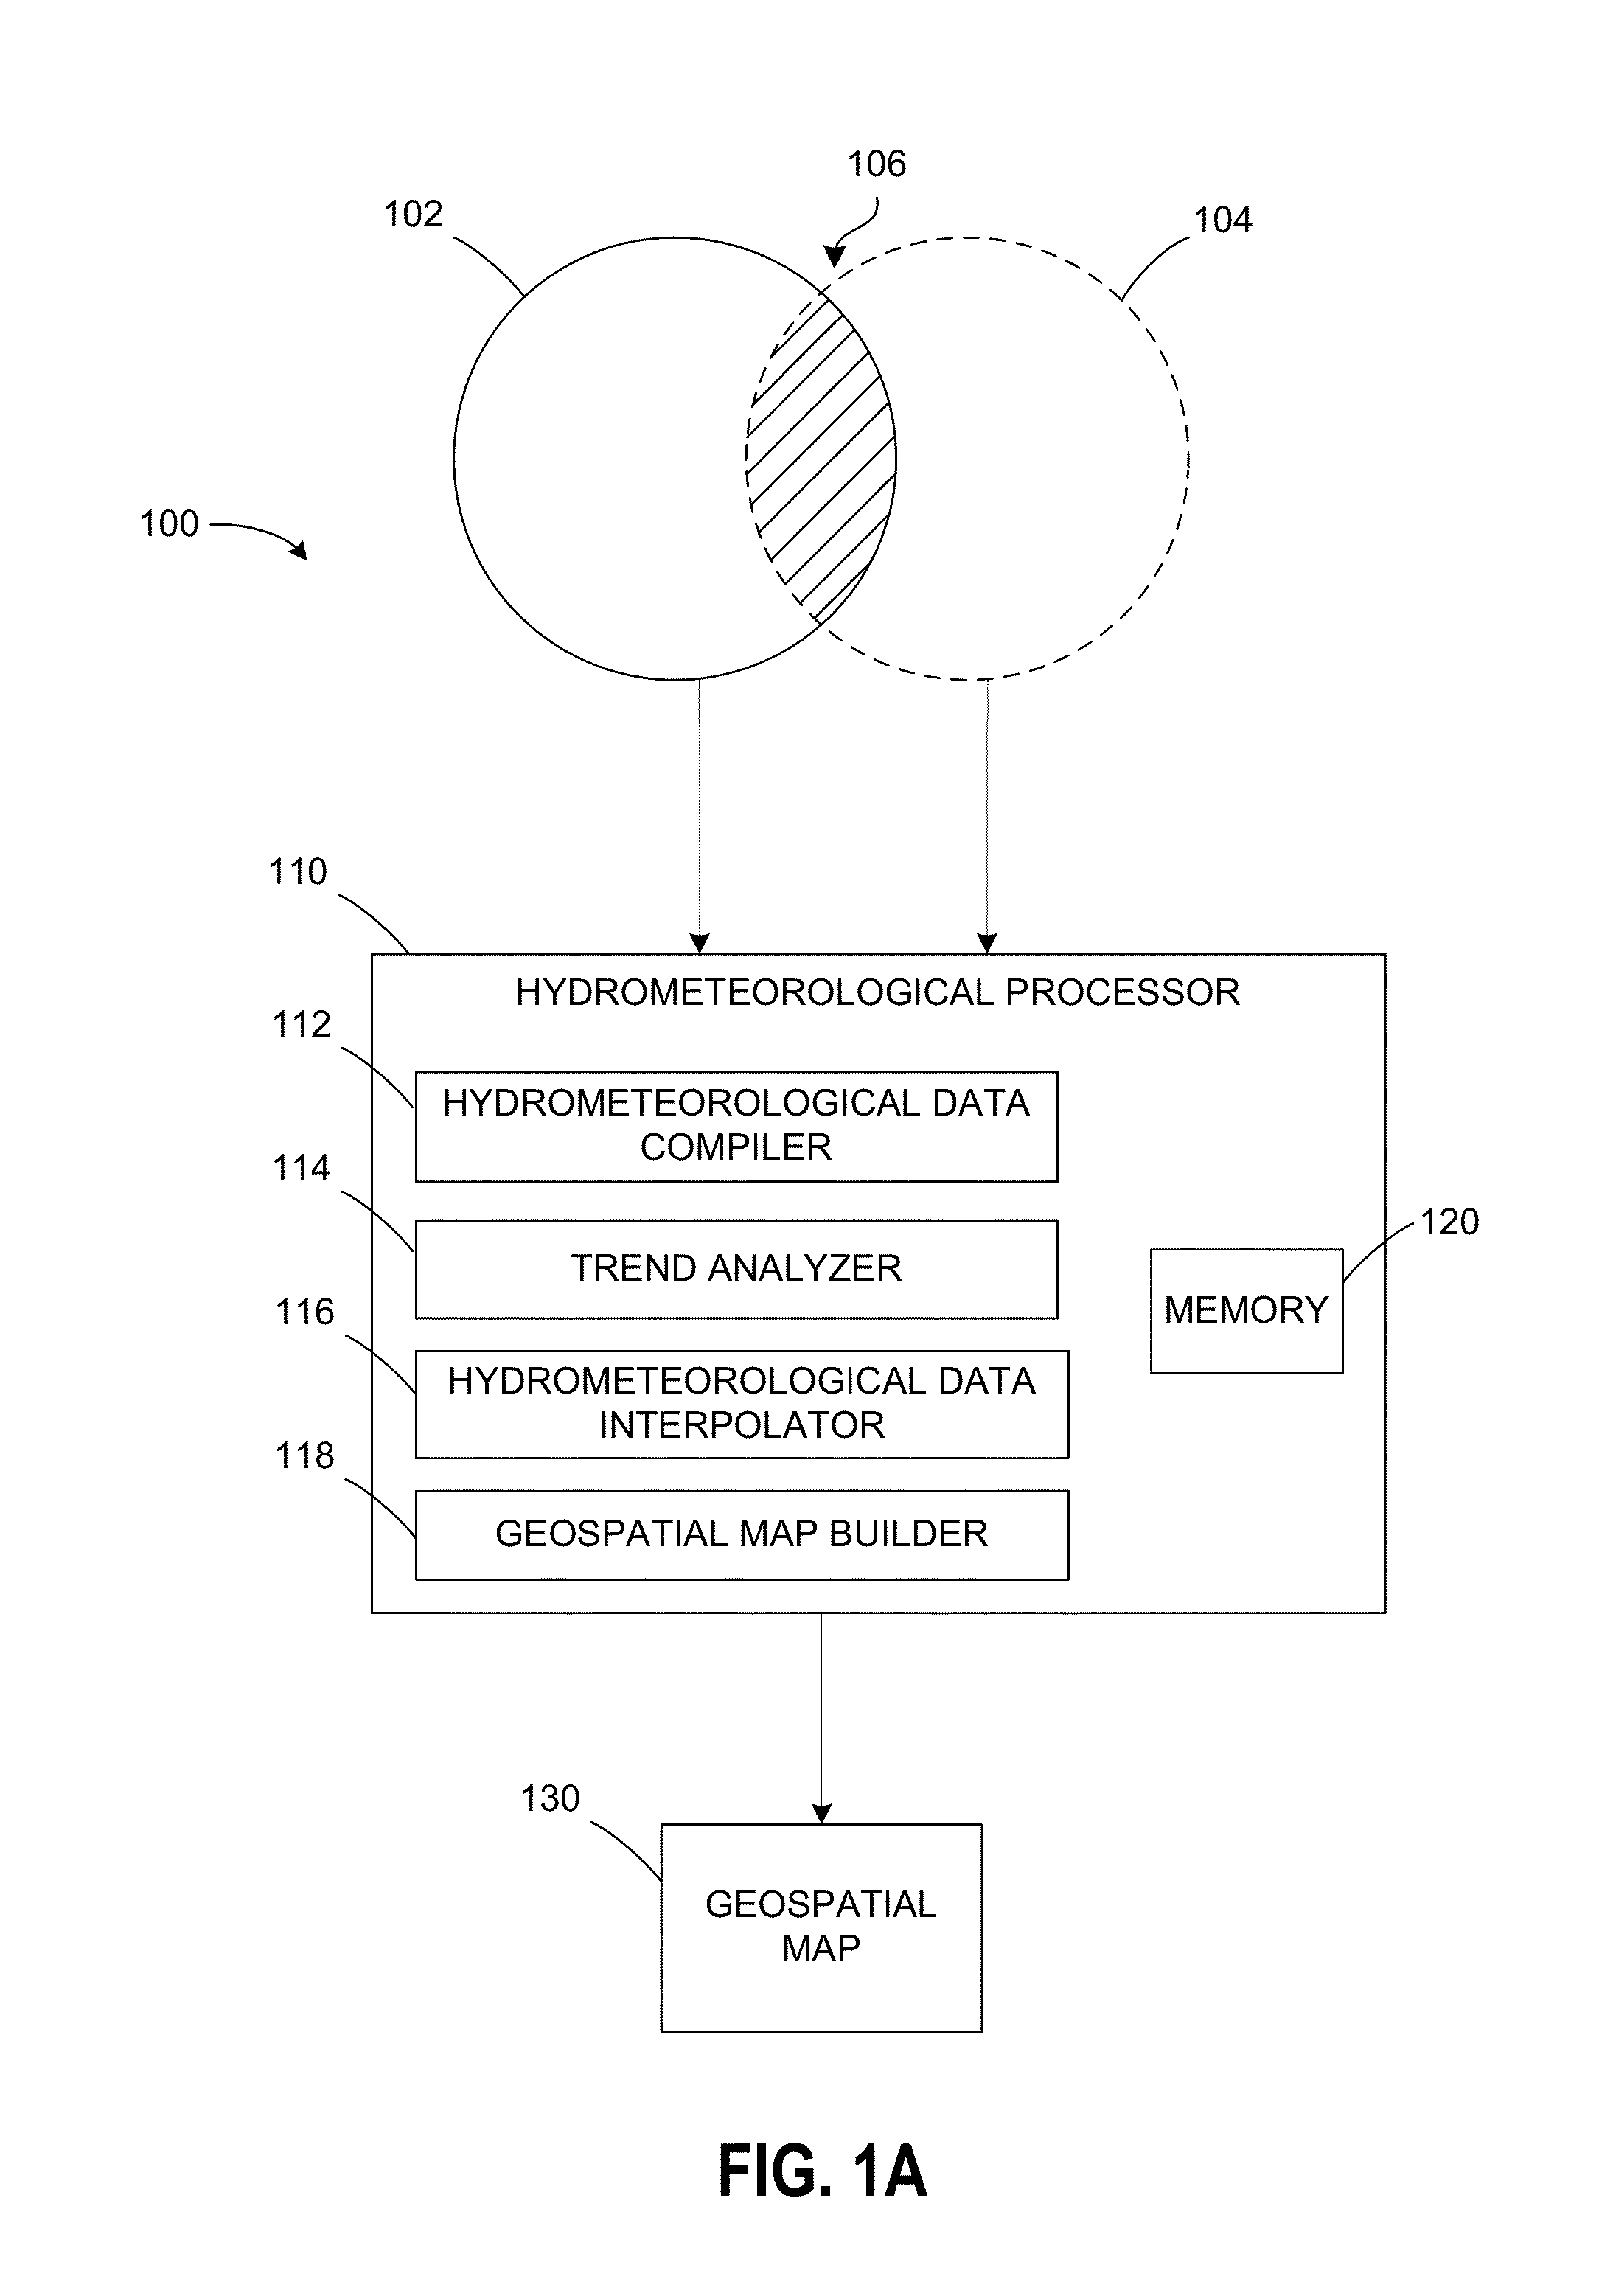 Simultaneous multi-event universal kriging methods for spatio-temporal data analysis and mapping